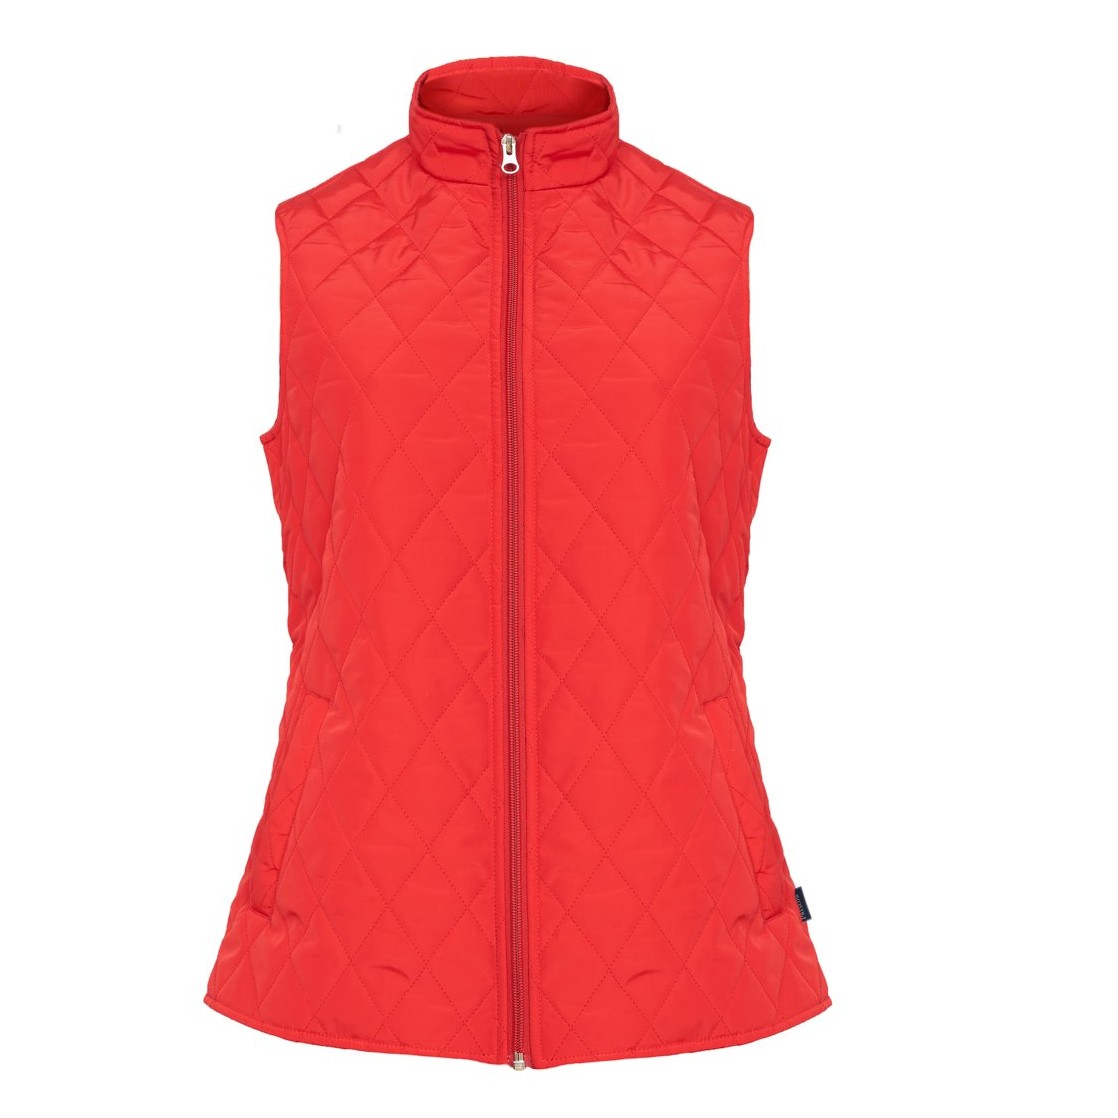 Unisex Fine Polyester Vest- Leon Style - Red Color Made